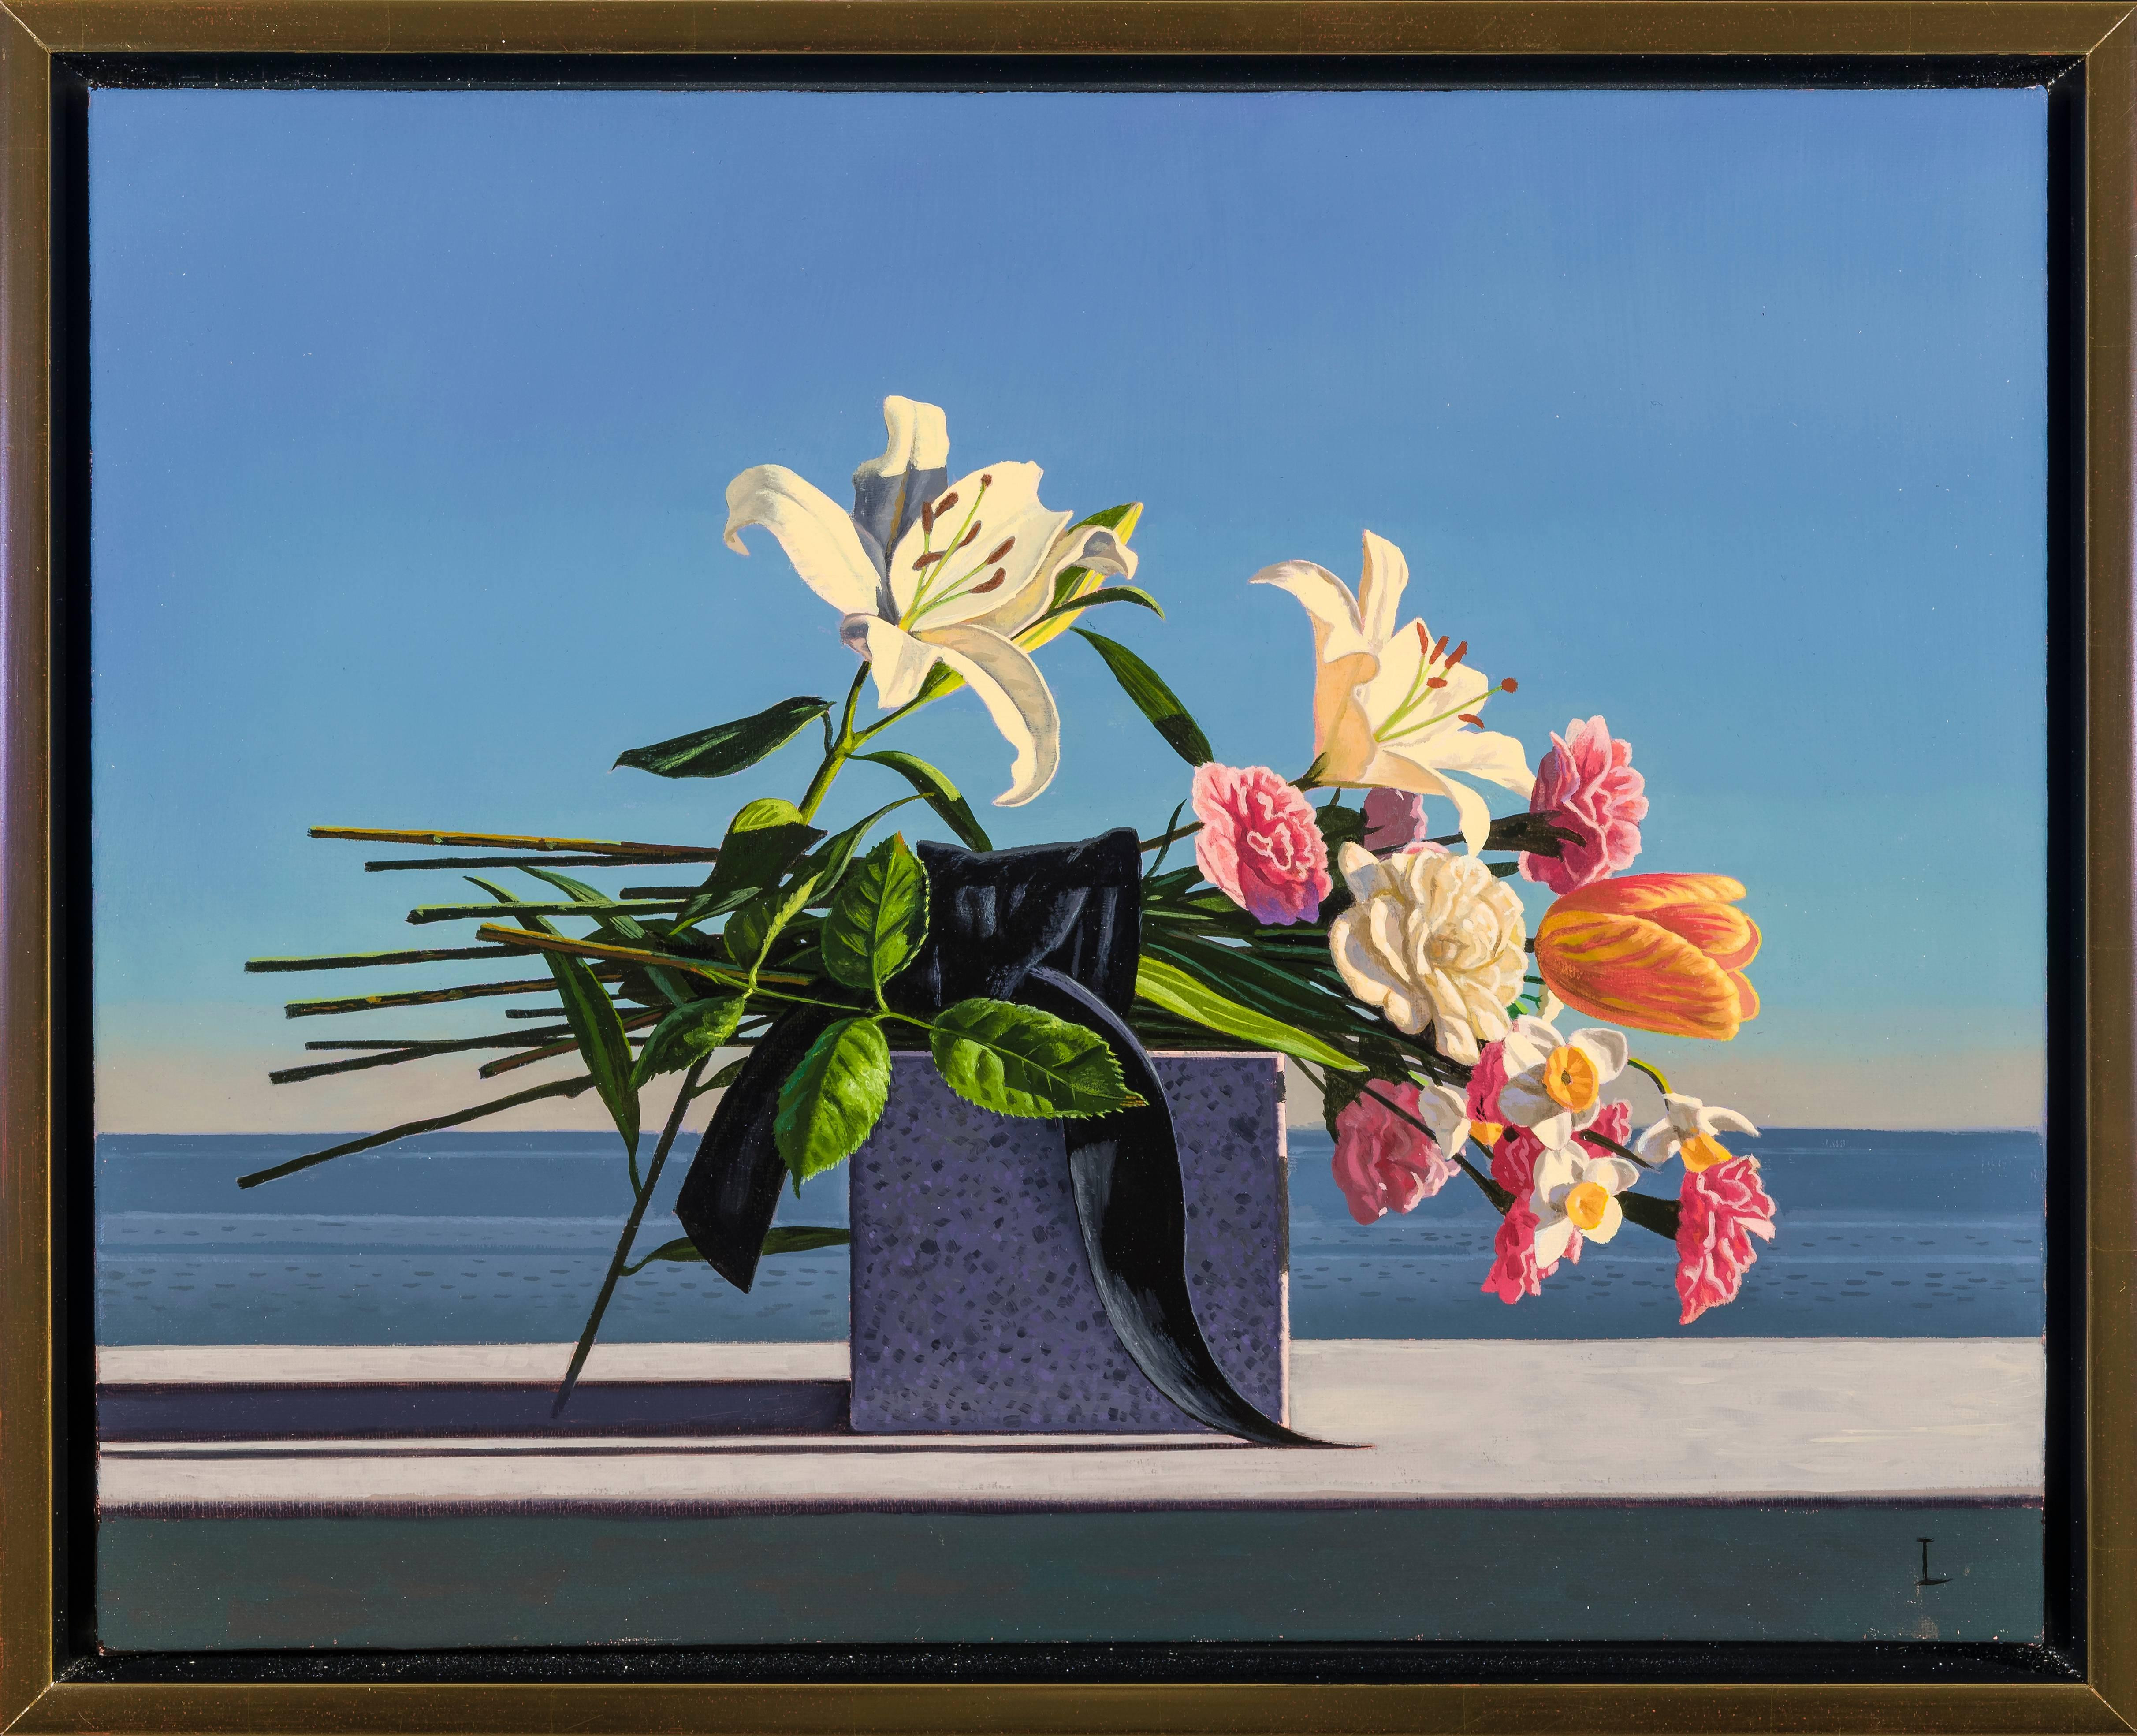 17 Wonderful Still Life Flowers In A Vase 2024 free download still life flowers in a vase of david ligare still life with flowers offering painting for sale pertaining to david ligare still life with flowers offering painting for sale at 1stdibs